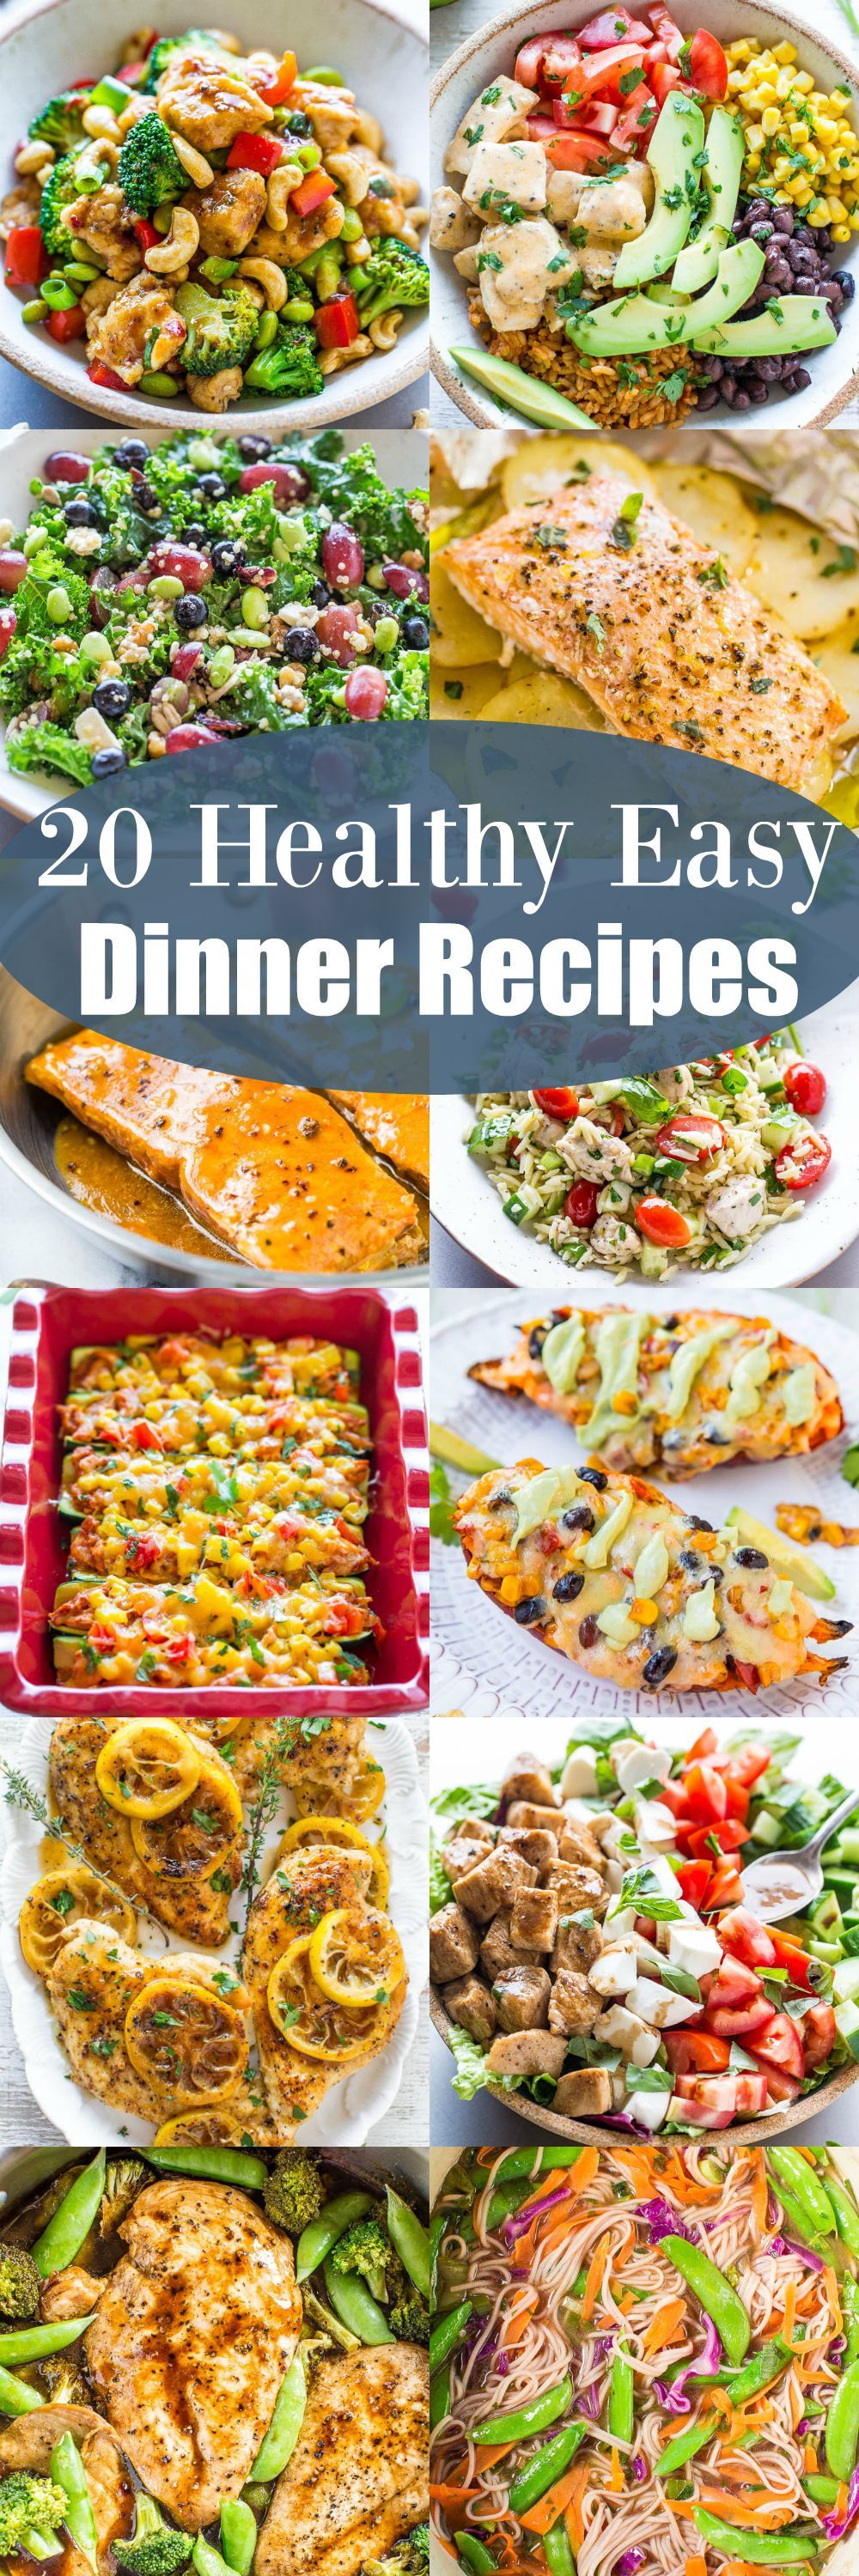 20 Healthy Easy Dinner Recipes – Looking for healthy, easy recipes that taste GREAT and everyone in the family will love? Plenty